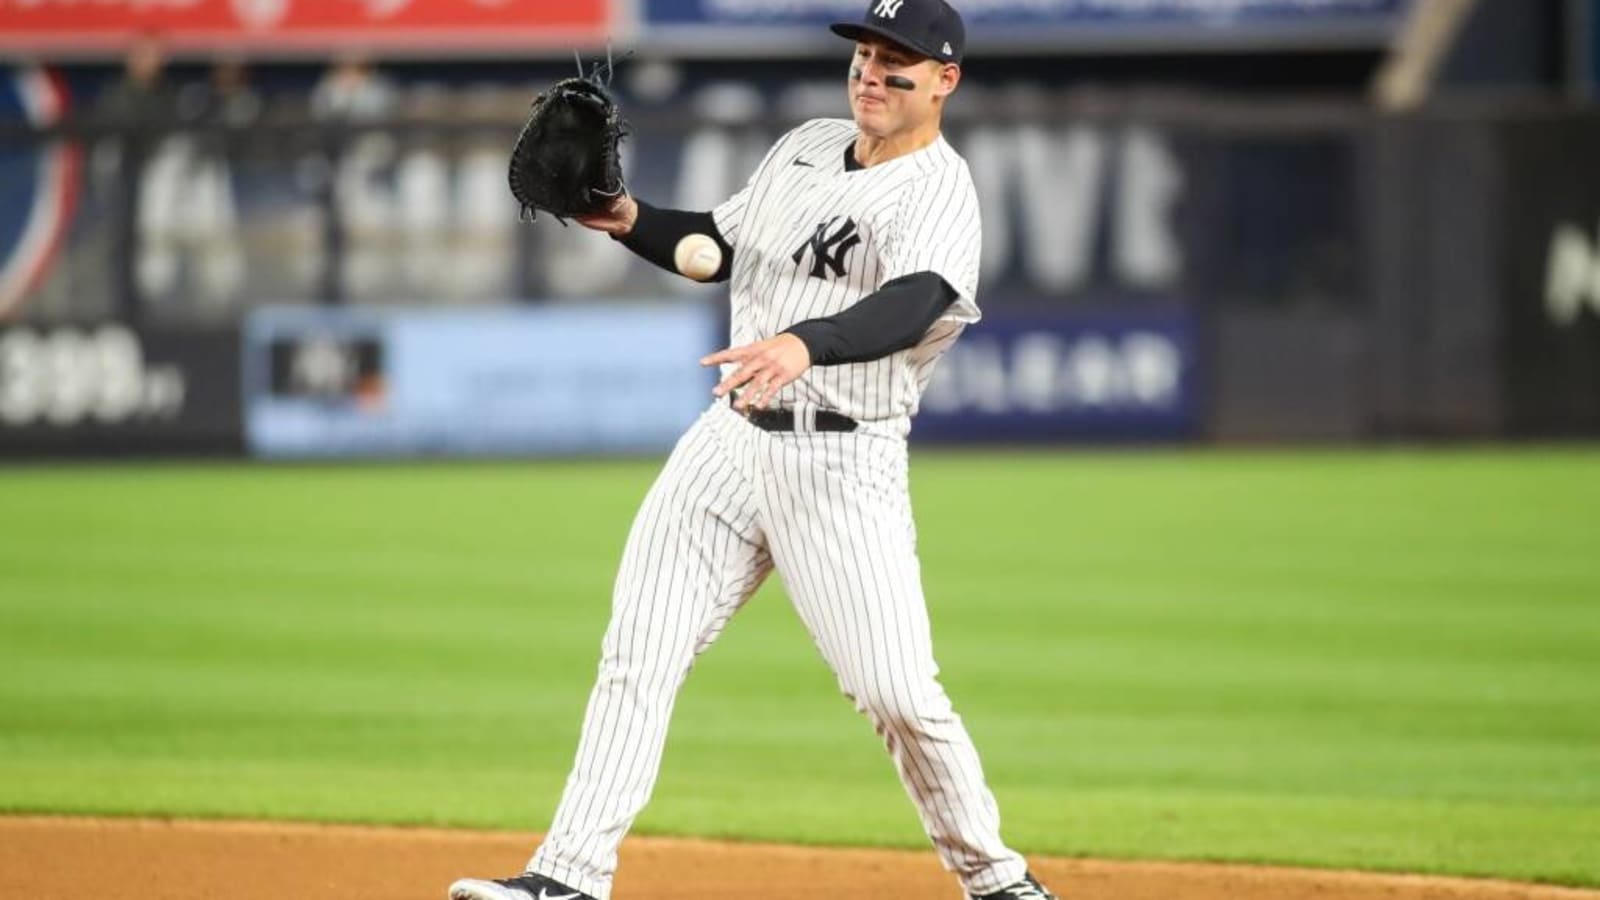 watch ny yankees live online free